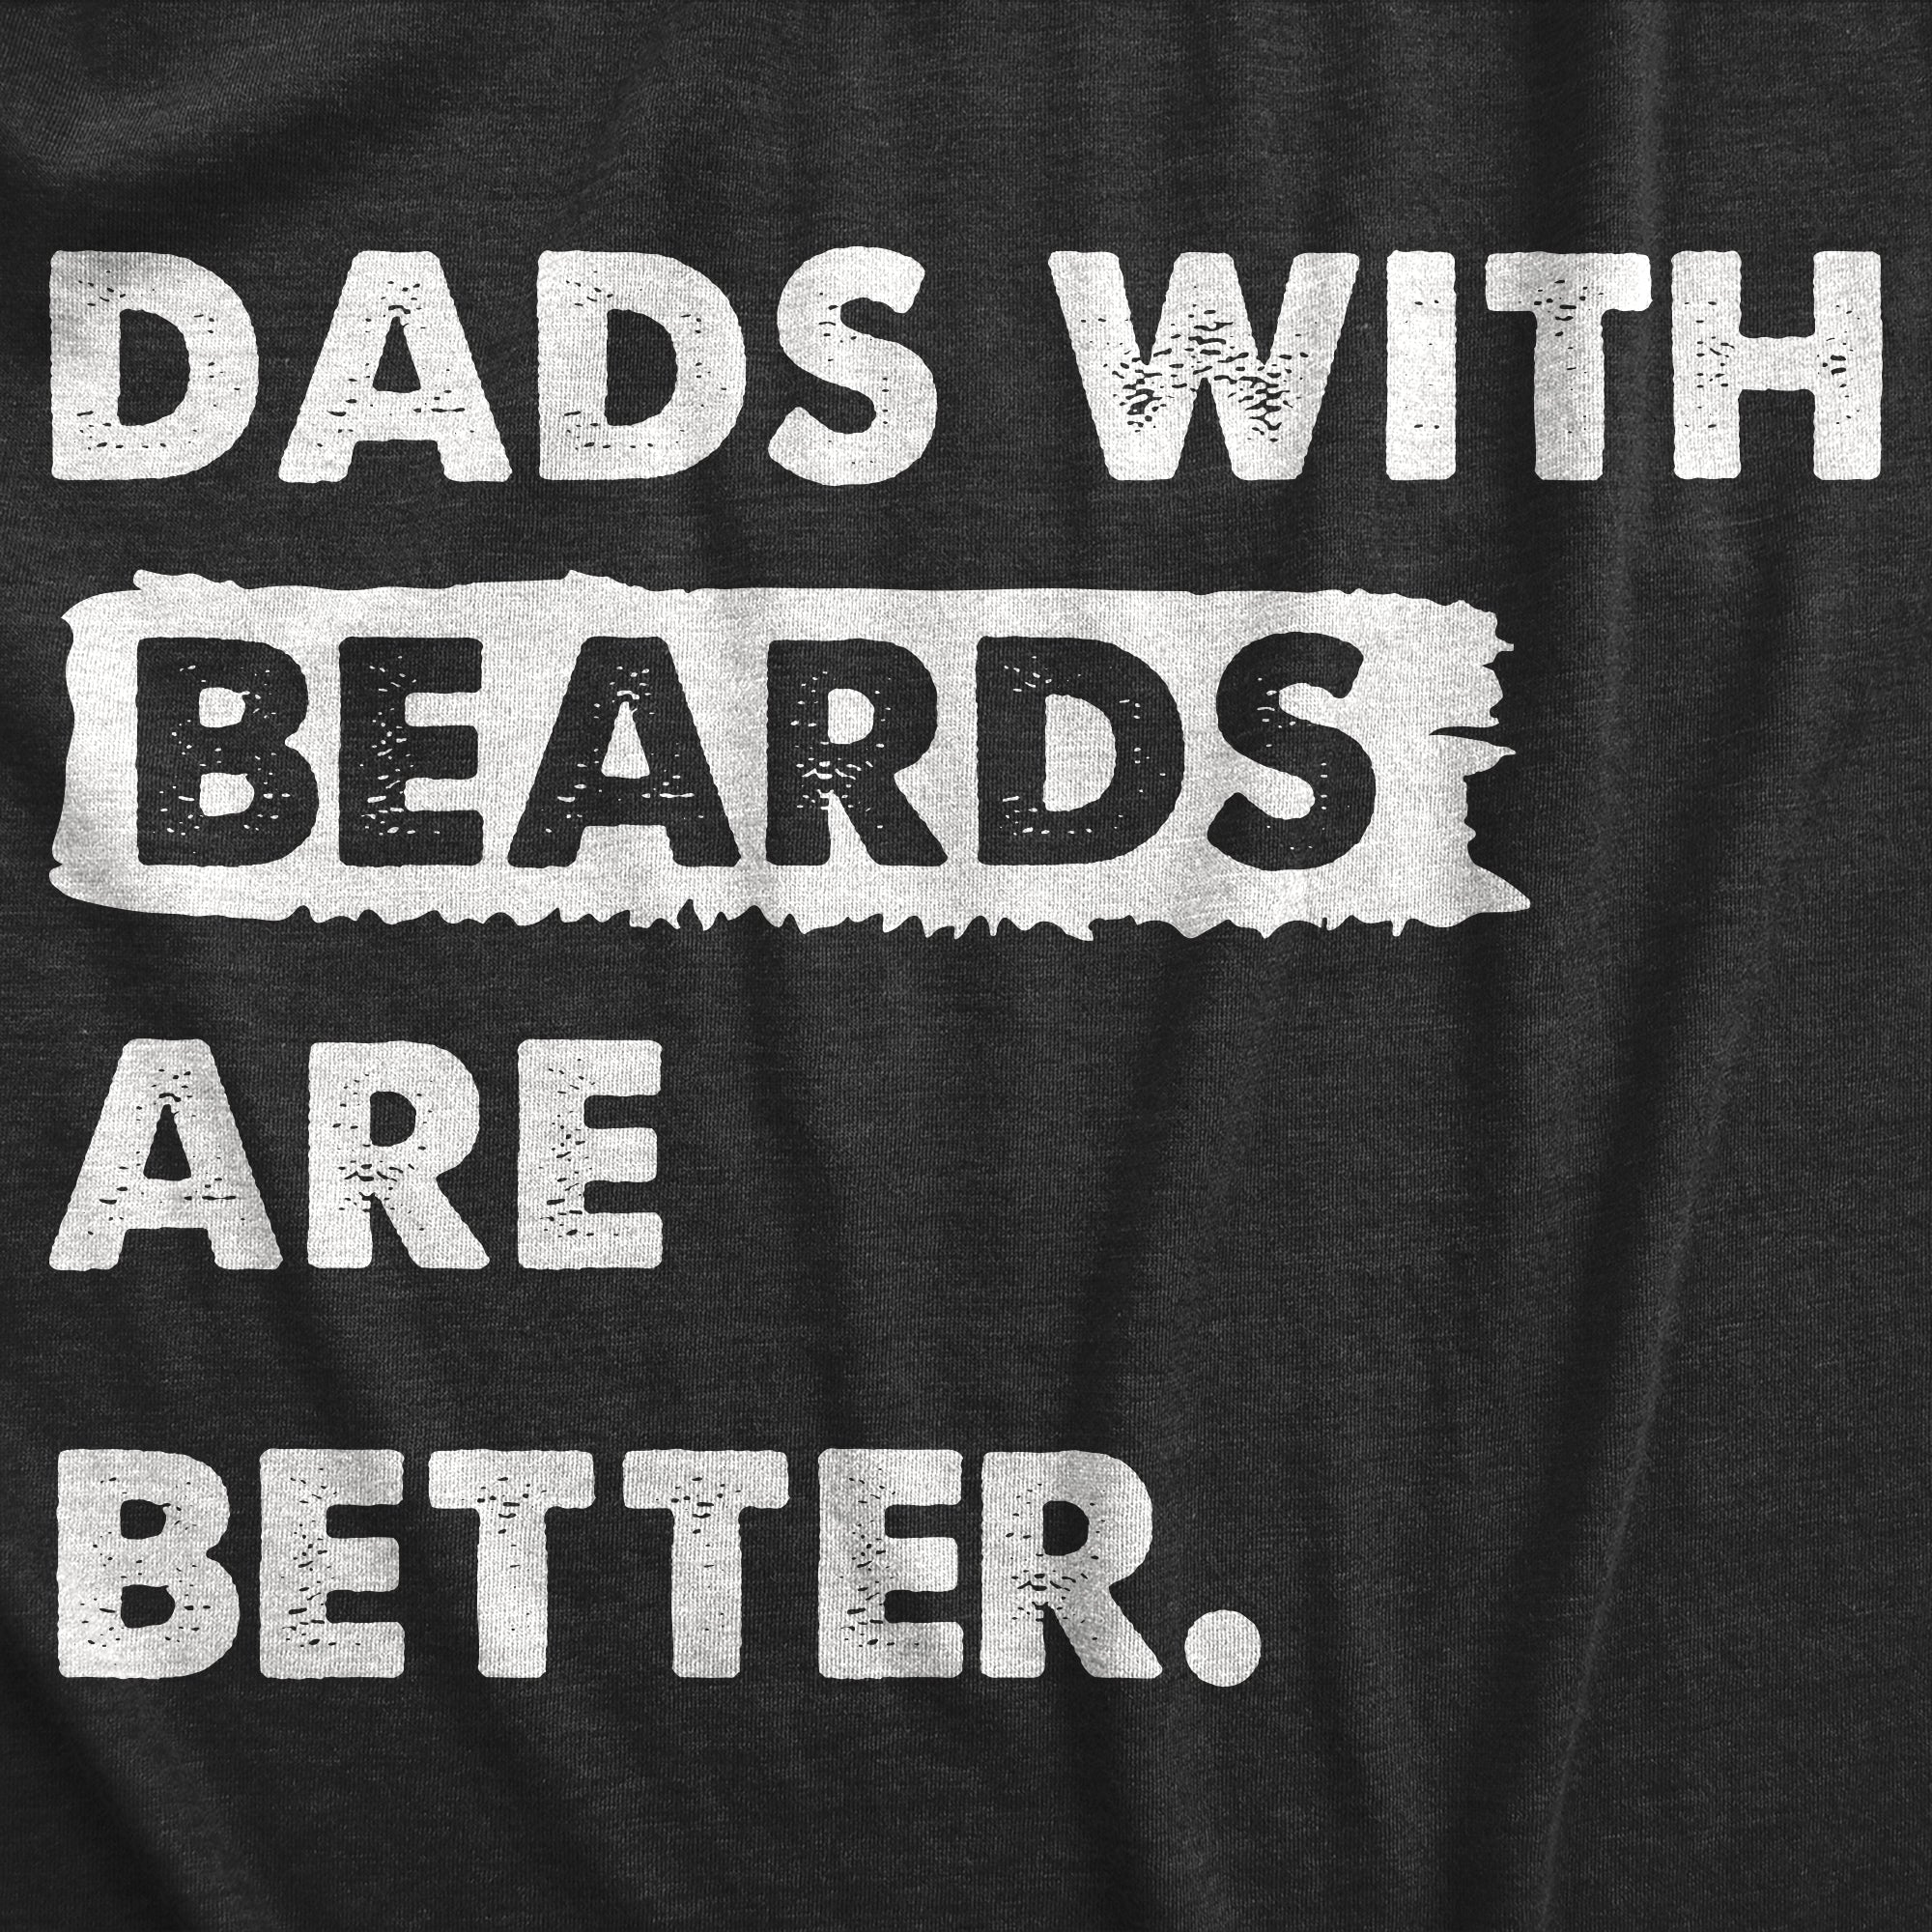 Funny Heather Black - BEARDS Dads With Beards Are Better Mens T Shirt Nerdy Father's Day Sarcastic Tee